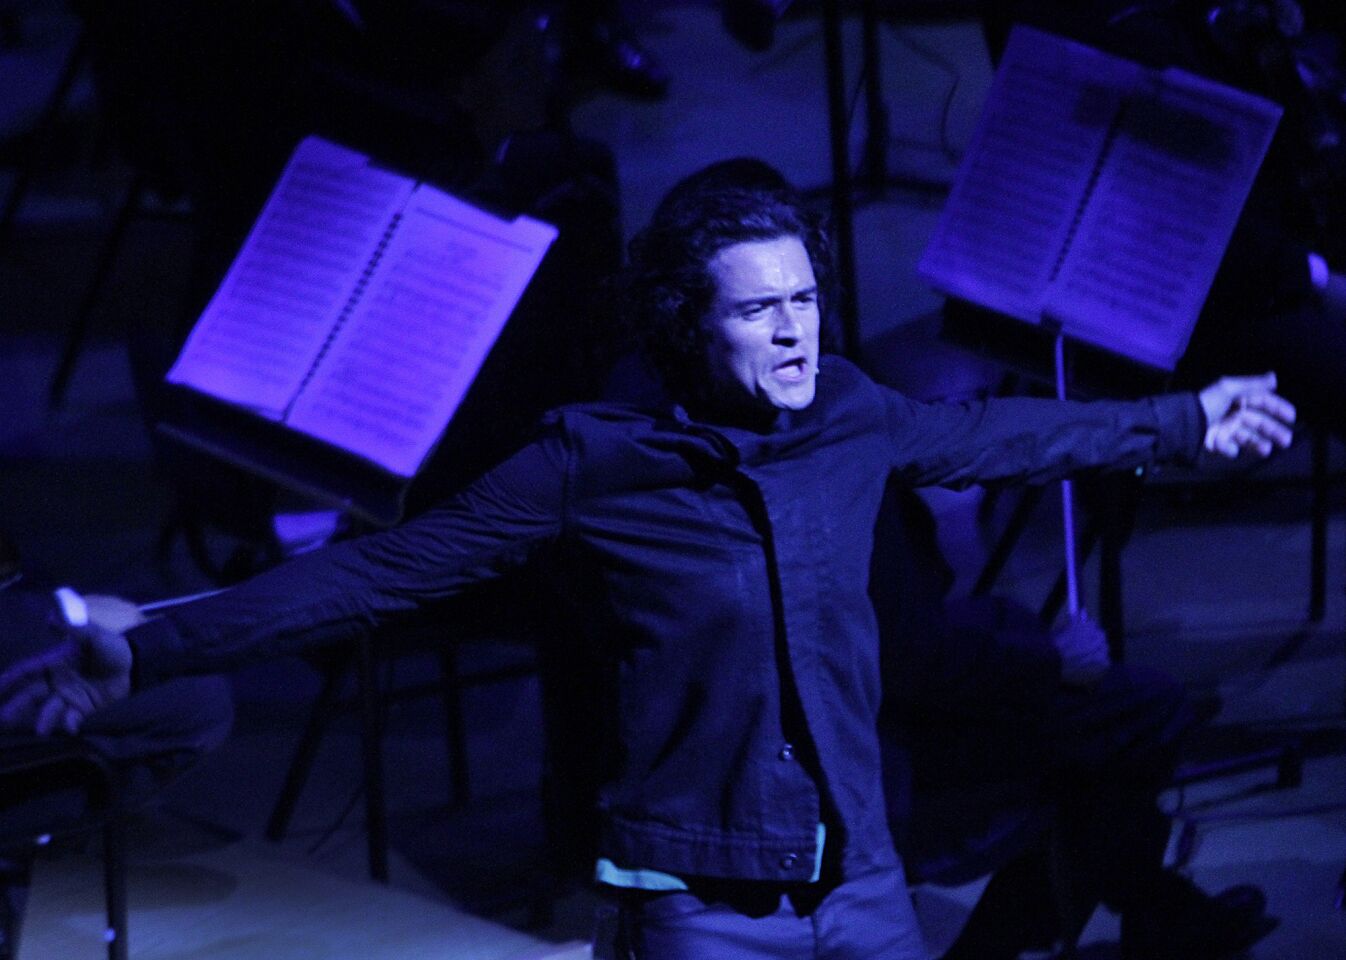 Orlando Bloom as Romeo in a scene from "Romeo & Juliet" as Gustavo Dudamel conducts the Simón Bolívar Symphony Orchestra of Venezuela during Tchaikovsky Fest. MORE: Orlando Bloom, Joe Morton brighten TchaikovskyFest at Disney Hall REVIEW: Tchaikovsky on a grand scale